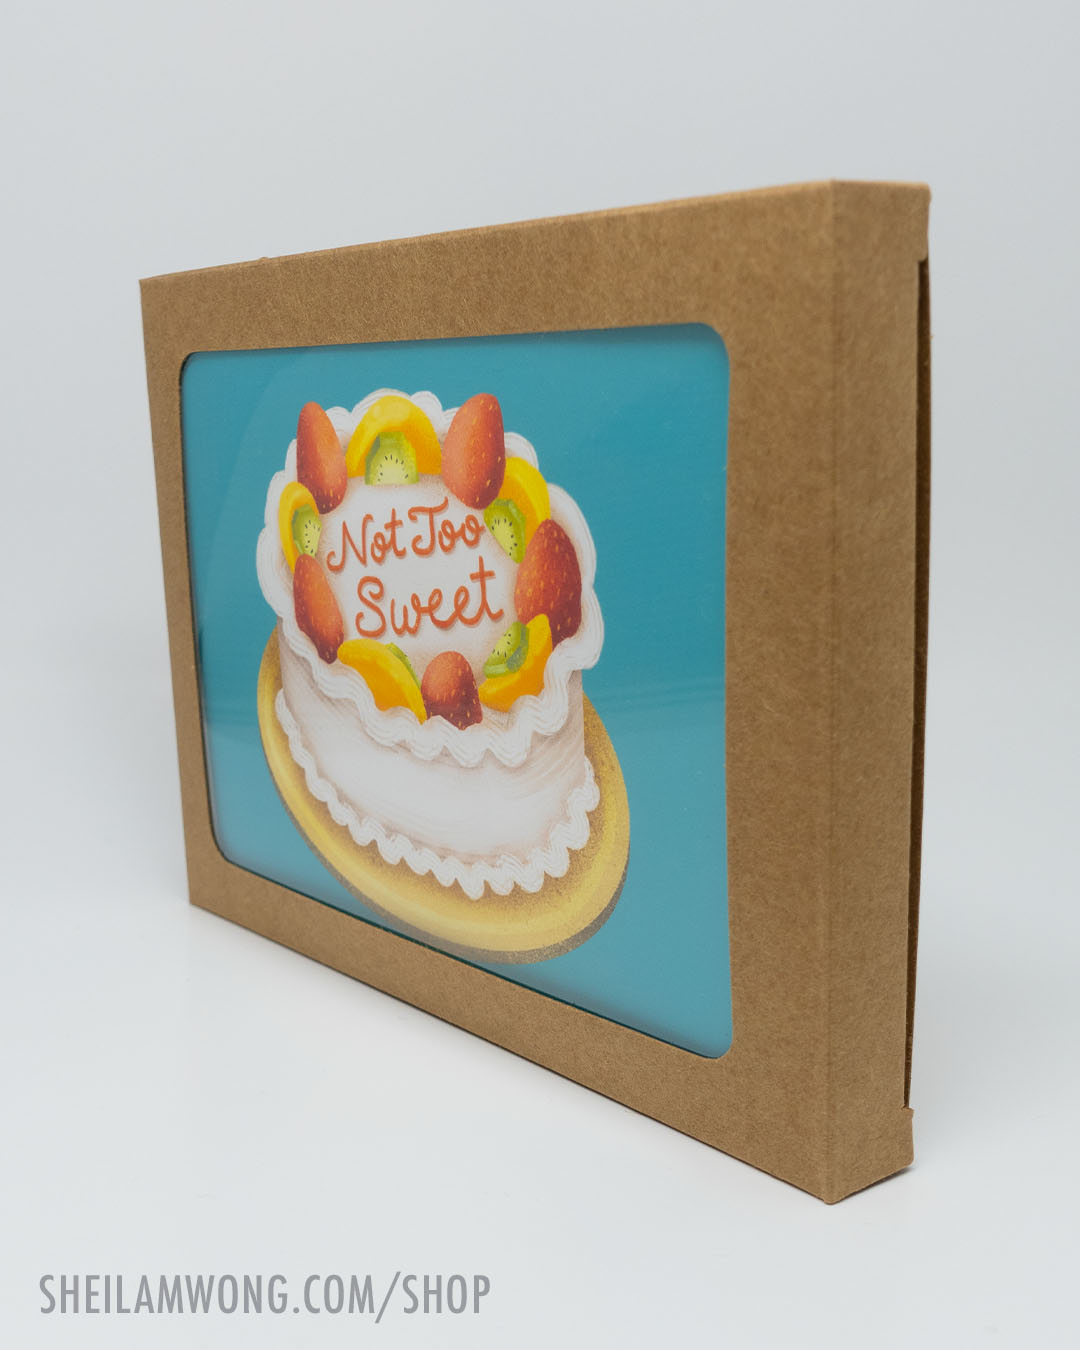 Not Too Sweet - Greeting Card